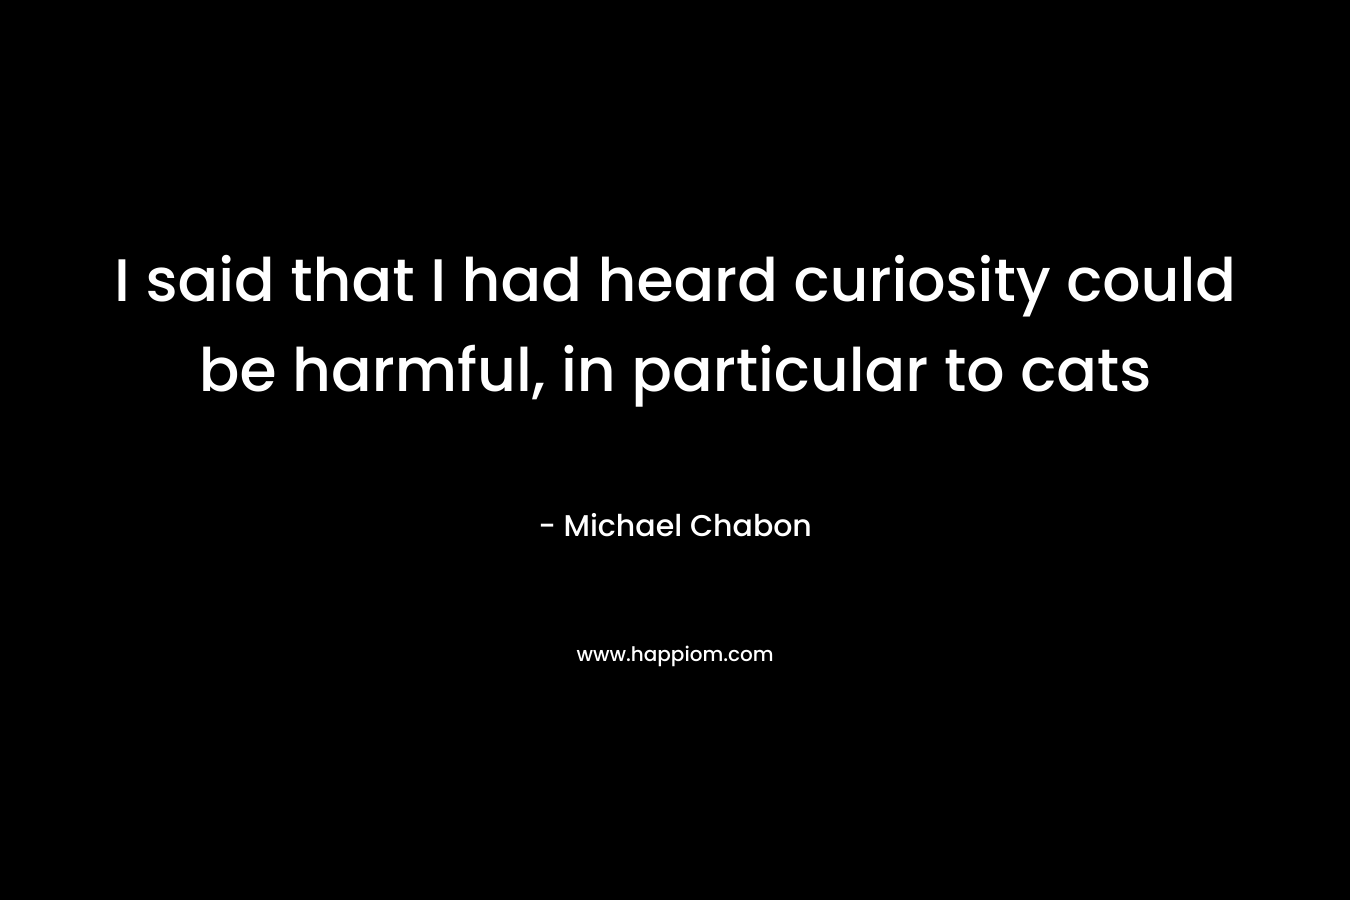 I said that I had heard curiosity could be harmful, in particular to cats